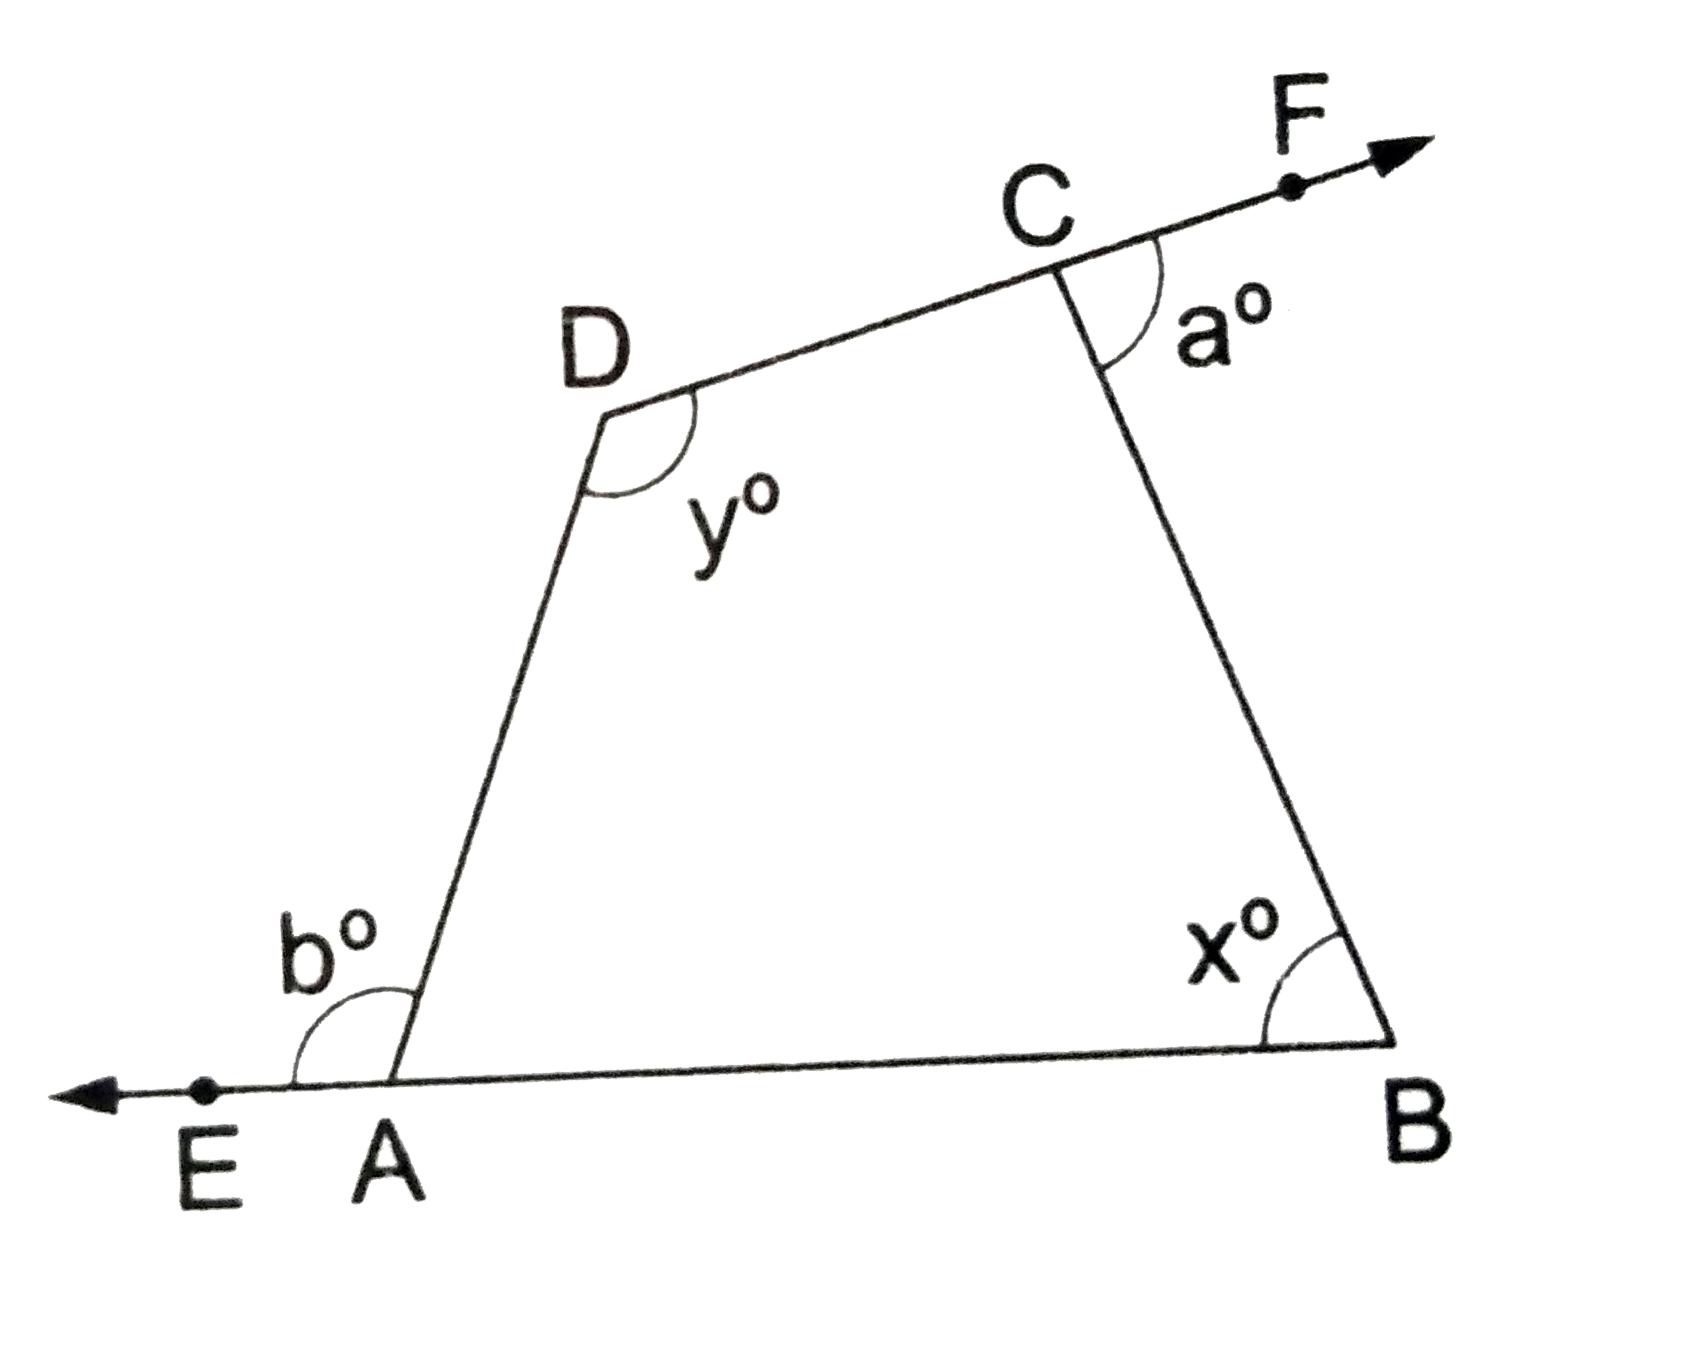 The sides BA and DC of a quadrilateral  are produced as shown in the given figure. Prove that x+y=a+b.